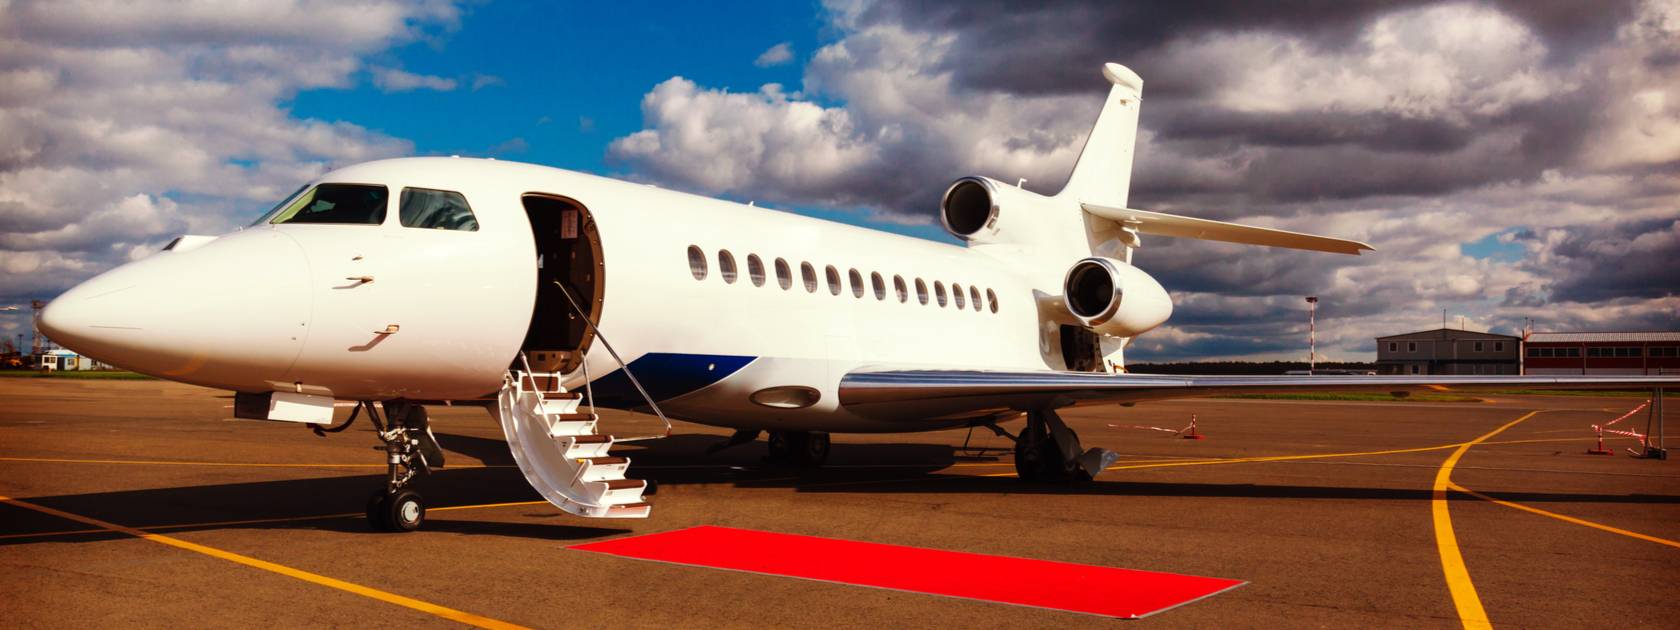 The 5 most expensive private jets in the world